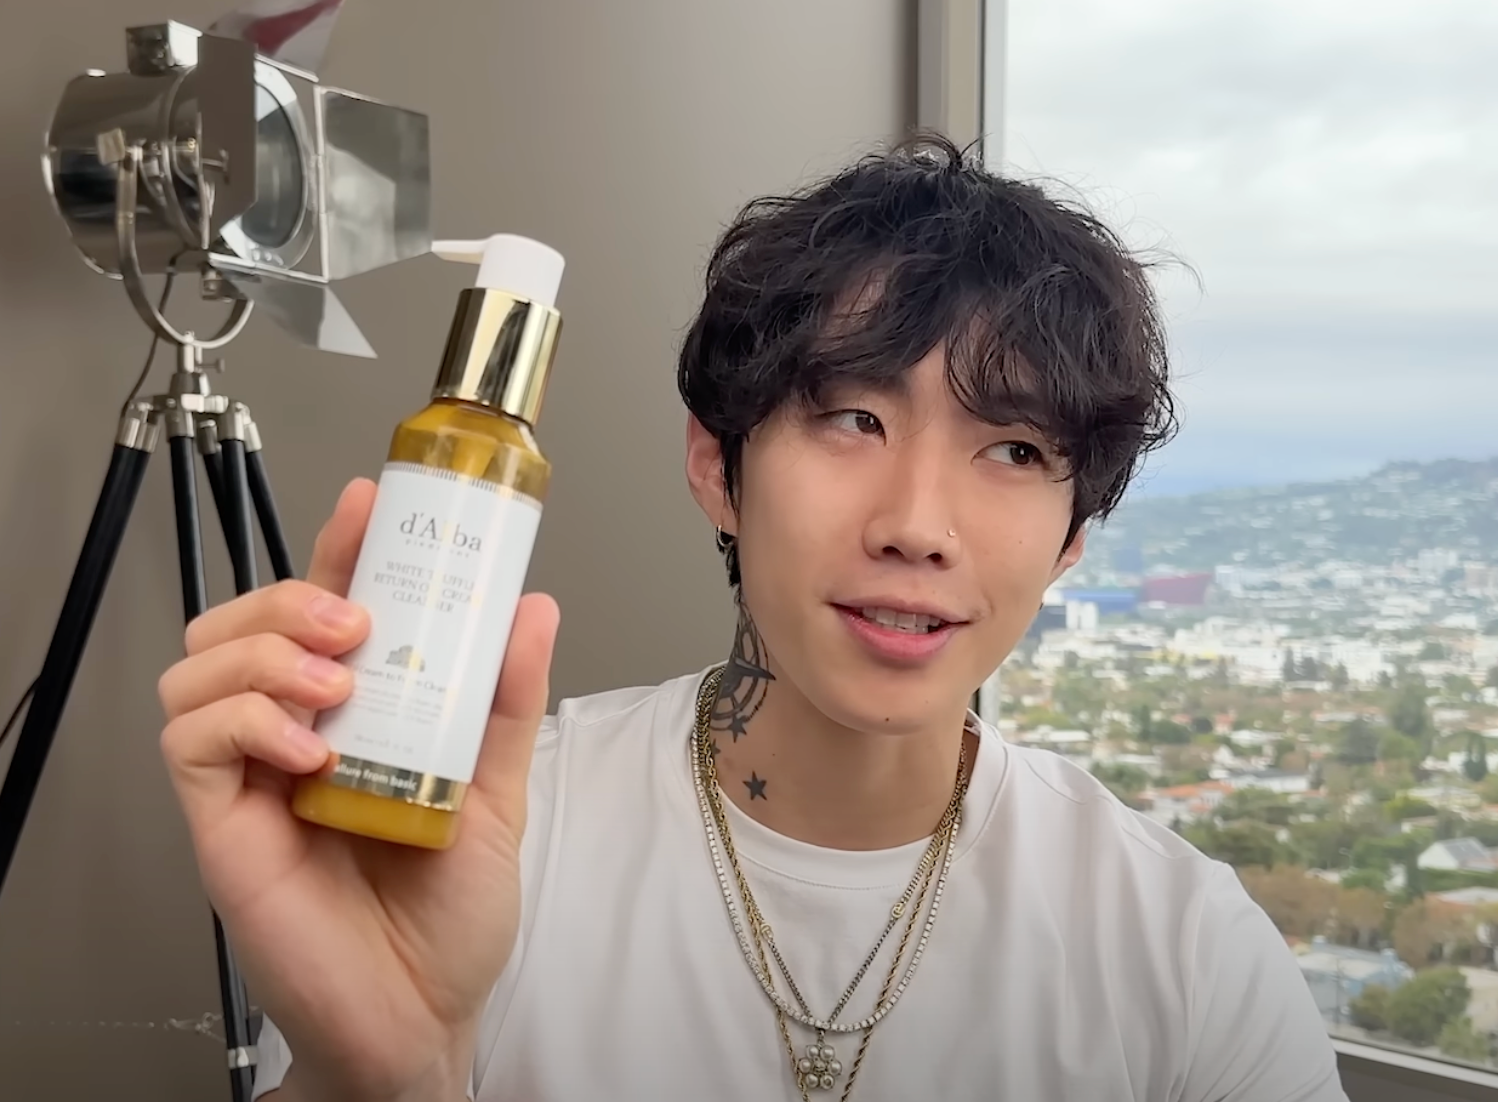 singer jay park with d'alba product 